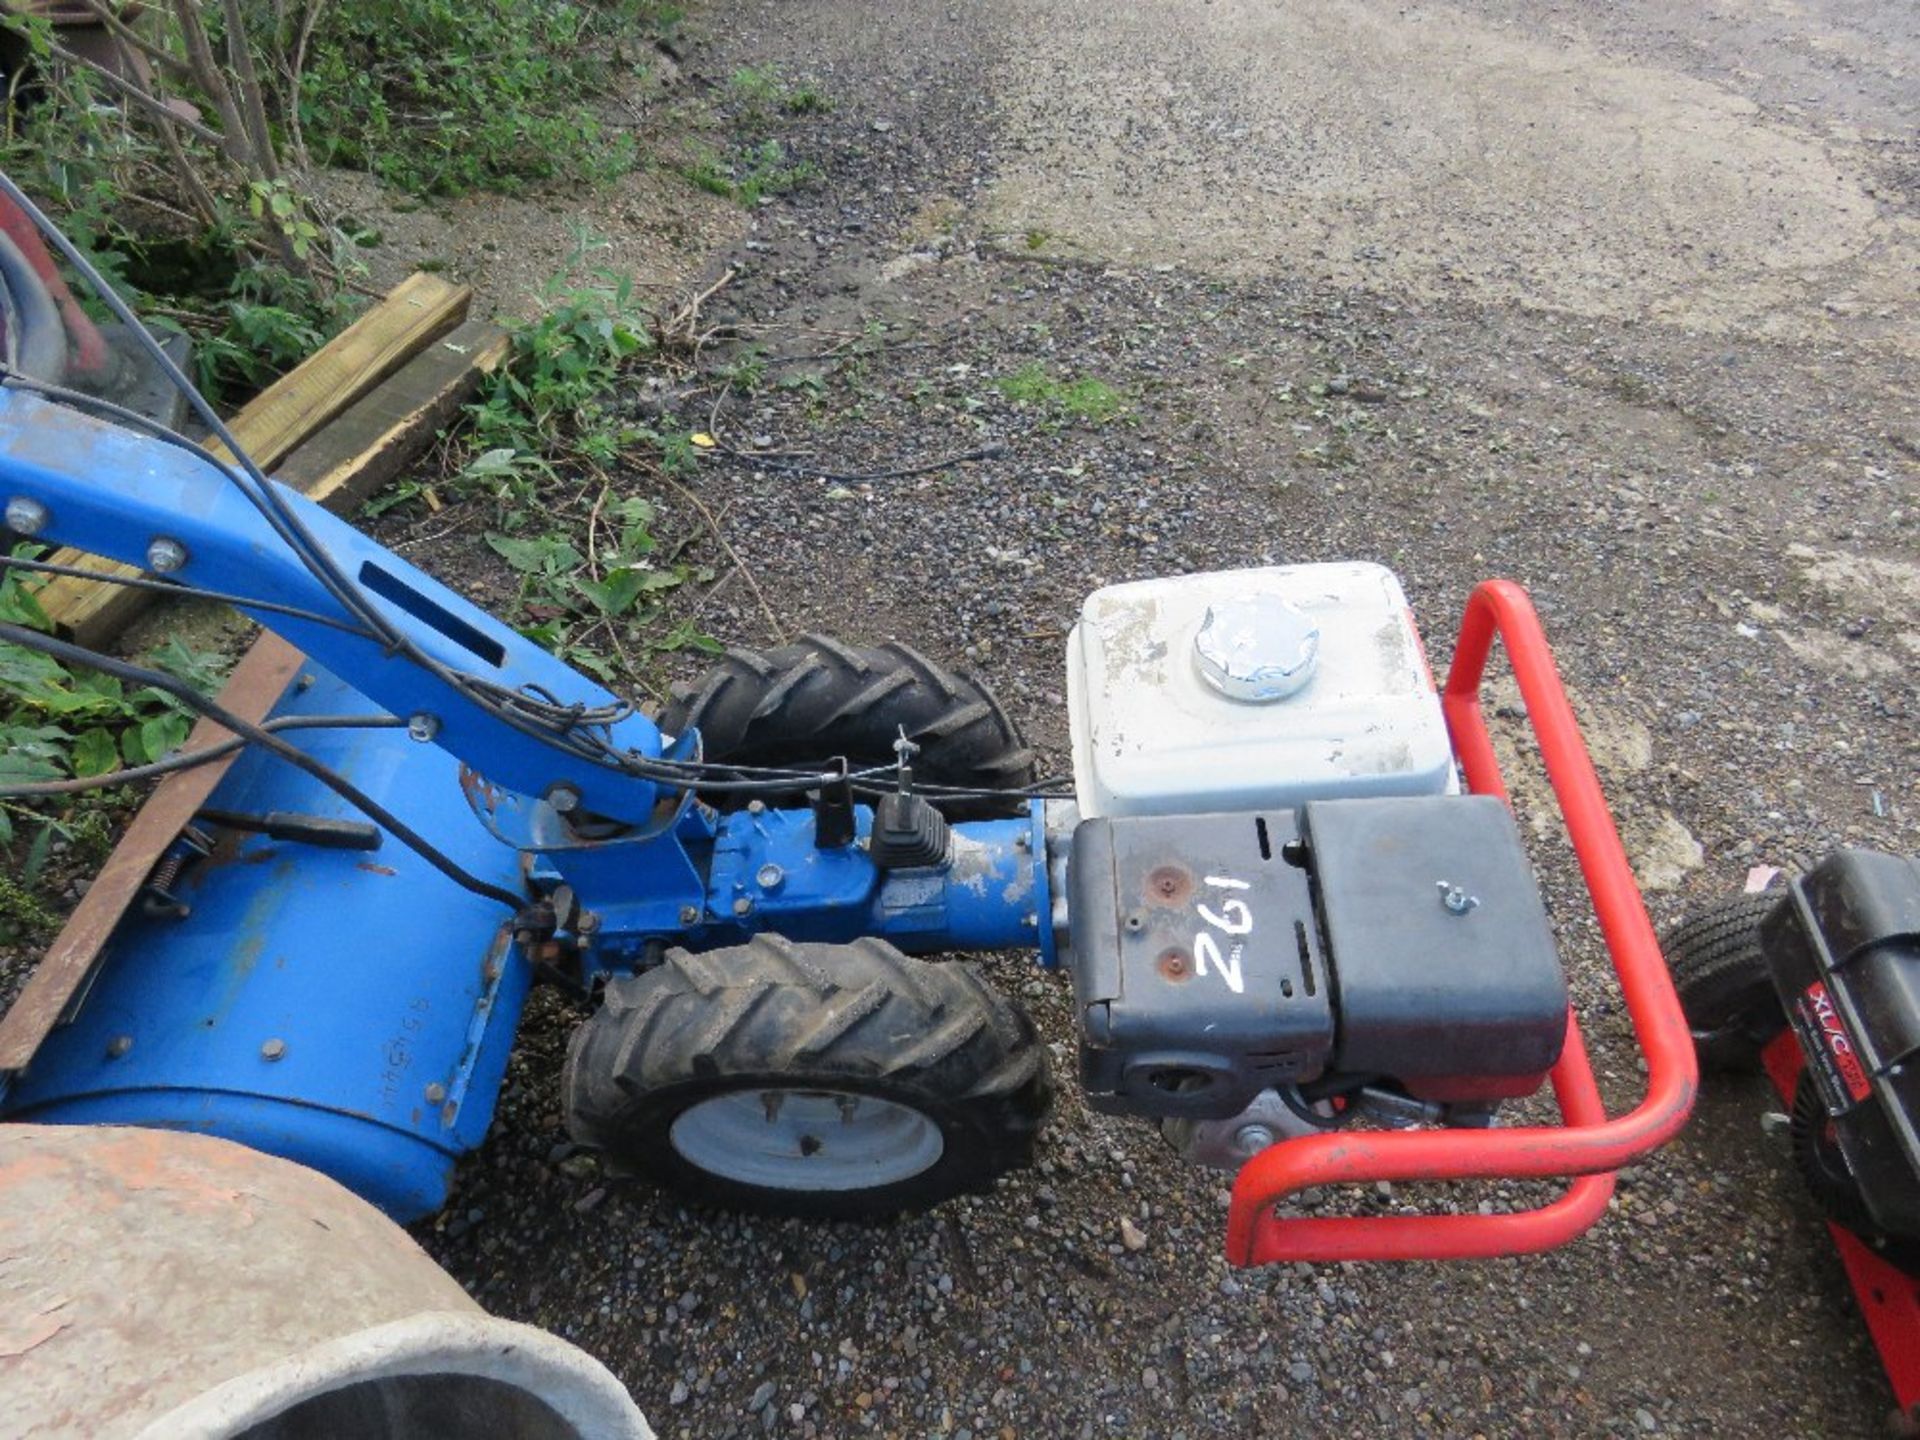 BCS CAMON PETROL ENGINED ROTORVATOR, YEAR 2007. WHEN TESTED WAS SEEN TO START, DRIVE, BLADES TURNED - Image 2 of 4